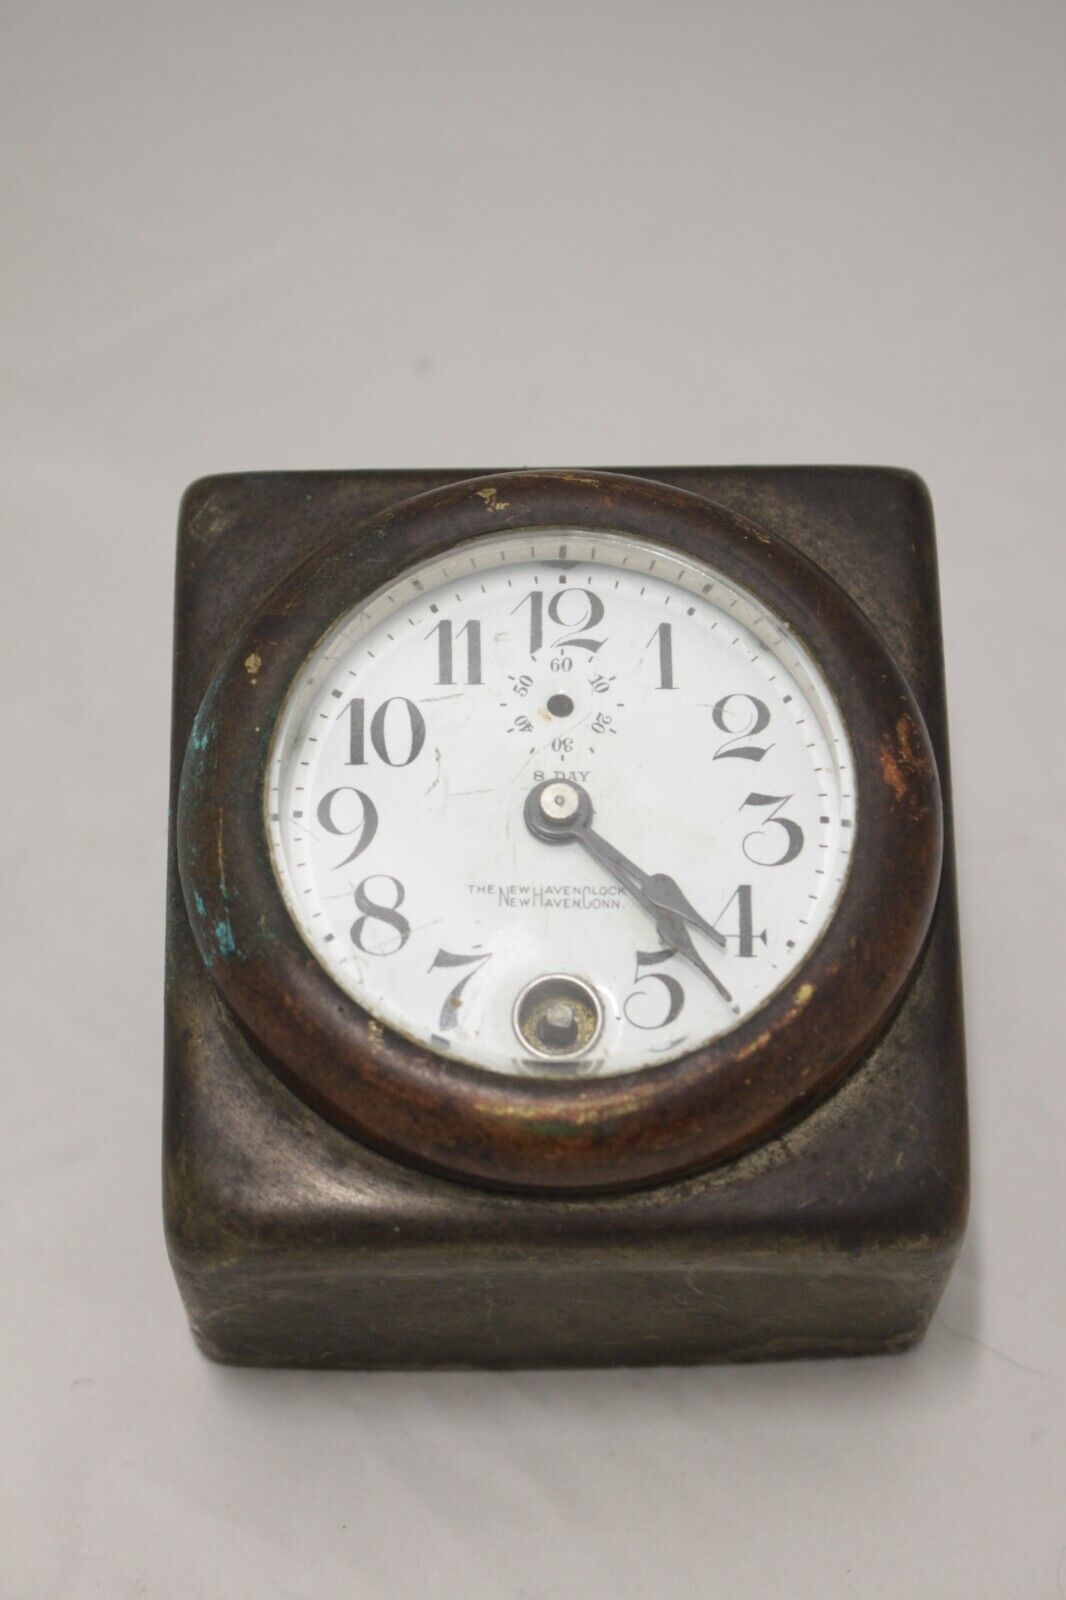 Vintage Dash Car Clock 1920s-1930s New Haven Clock Co. with Round Bevel Glass